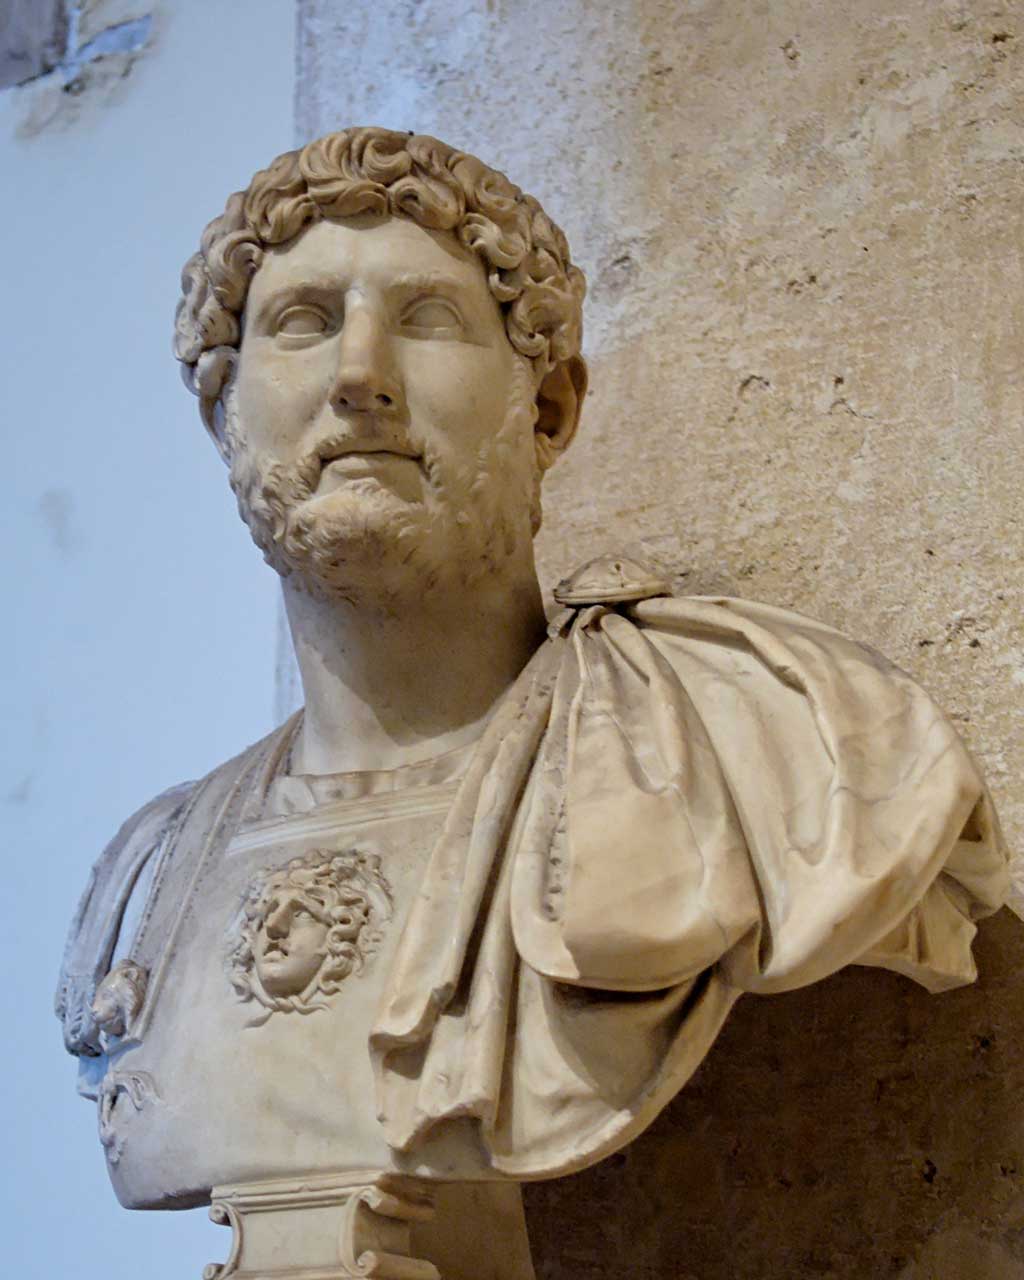 This photo shows a bust of Hadrian. Hadrian set a fashion for beards among Romans, and most emperors after him also wore a beard.